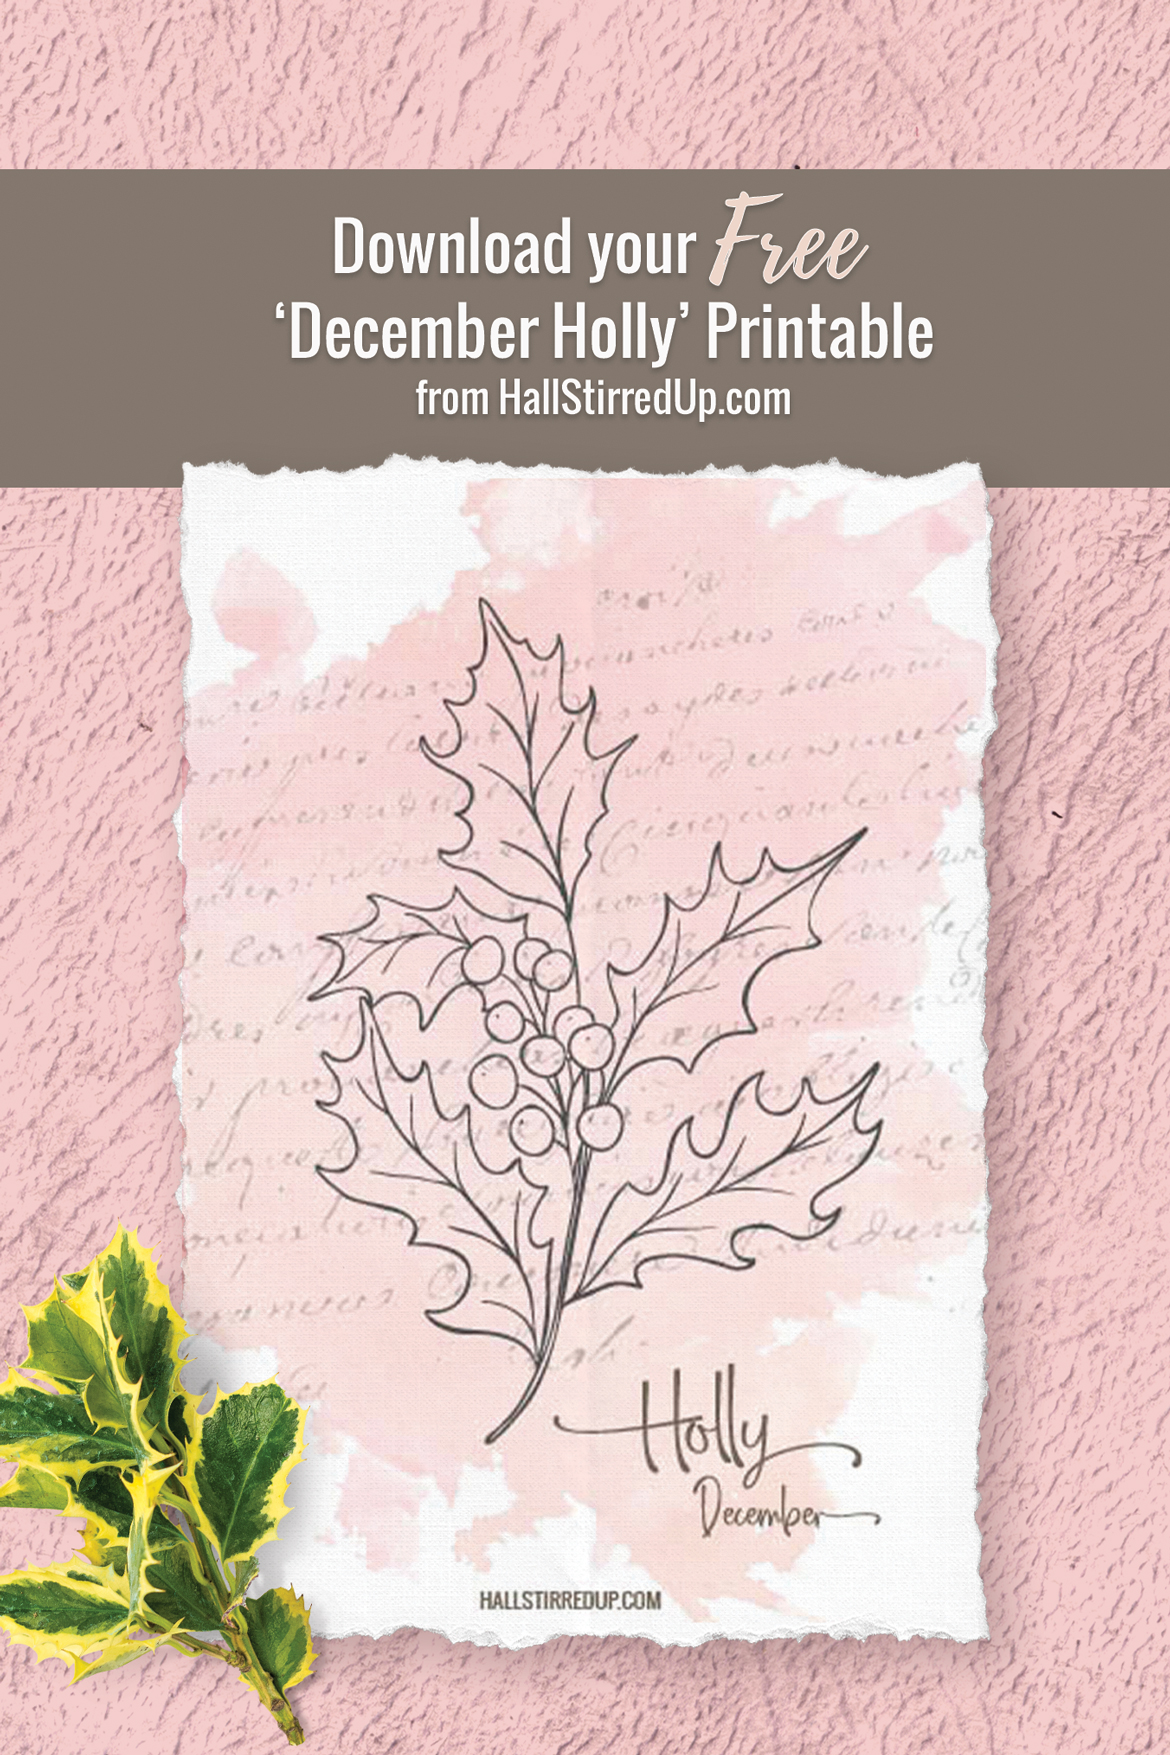 Festive Holly is December's Birth Flower Includes free printable